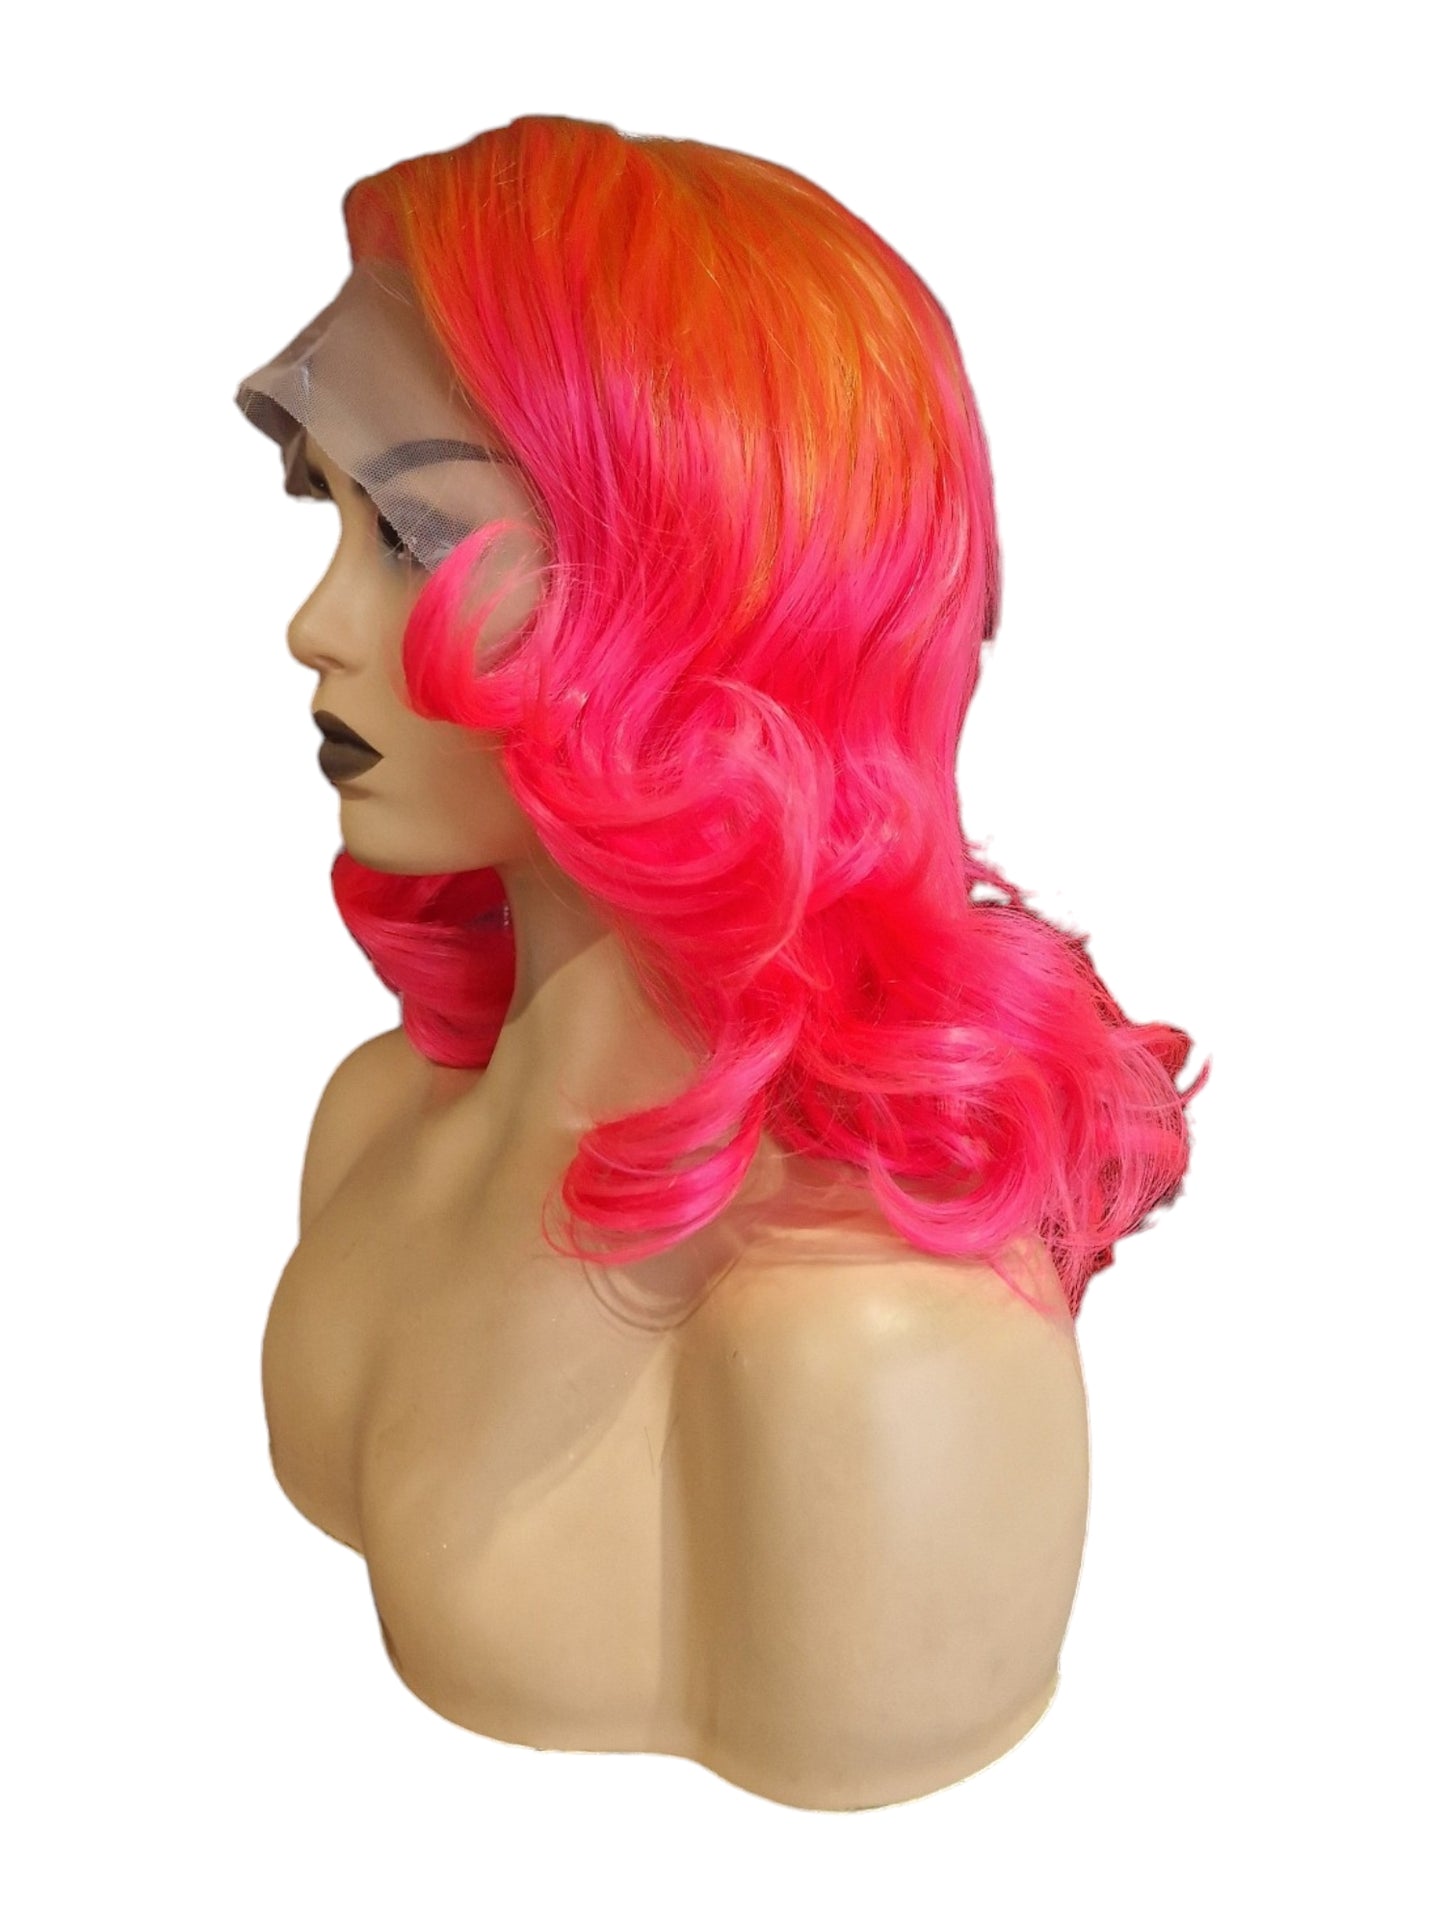 Neon Pink & Orange Marilyn Style Lace Front Wig. Vera